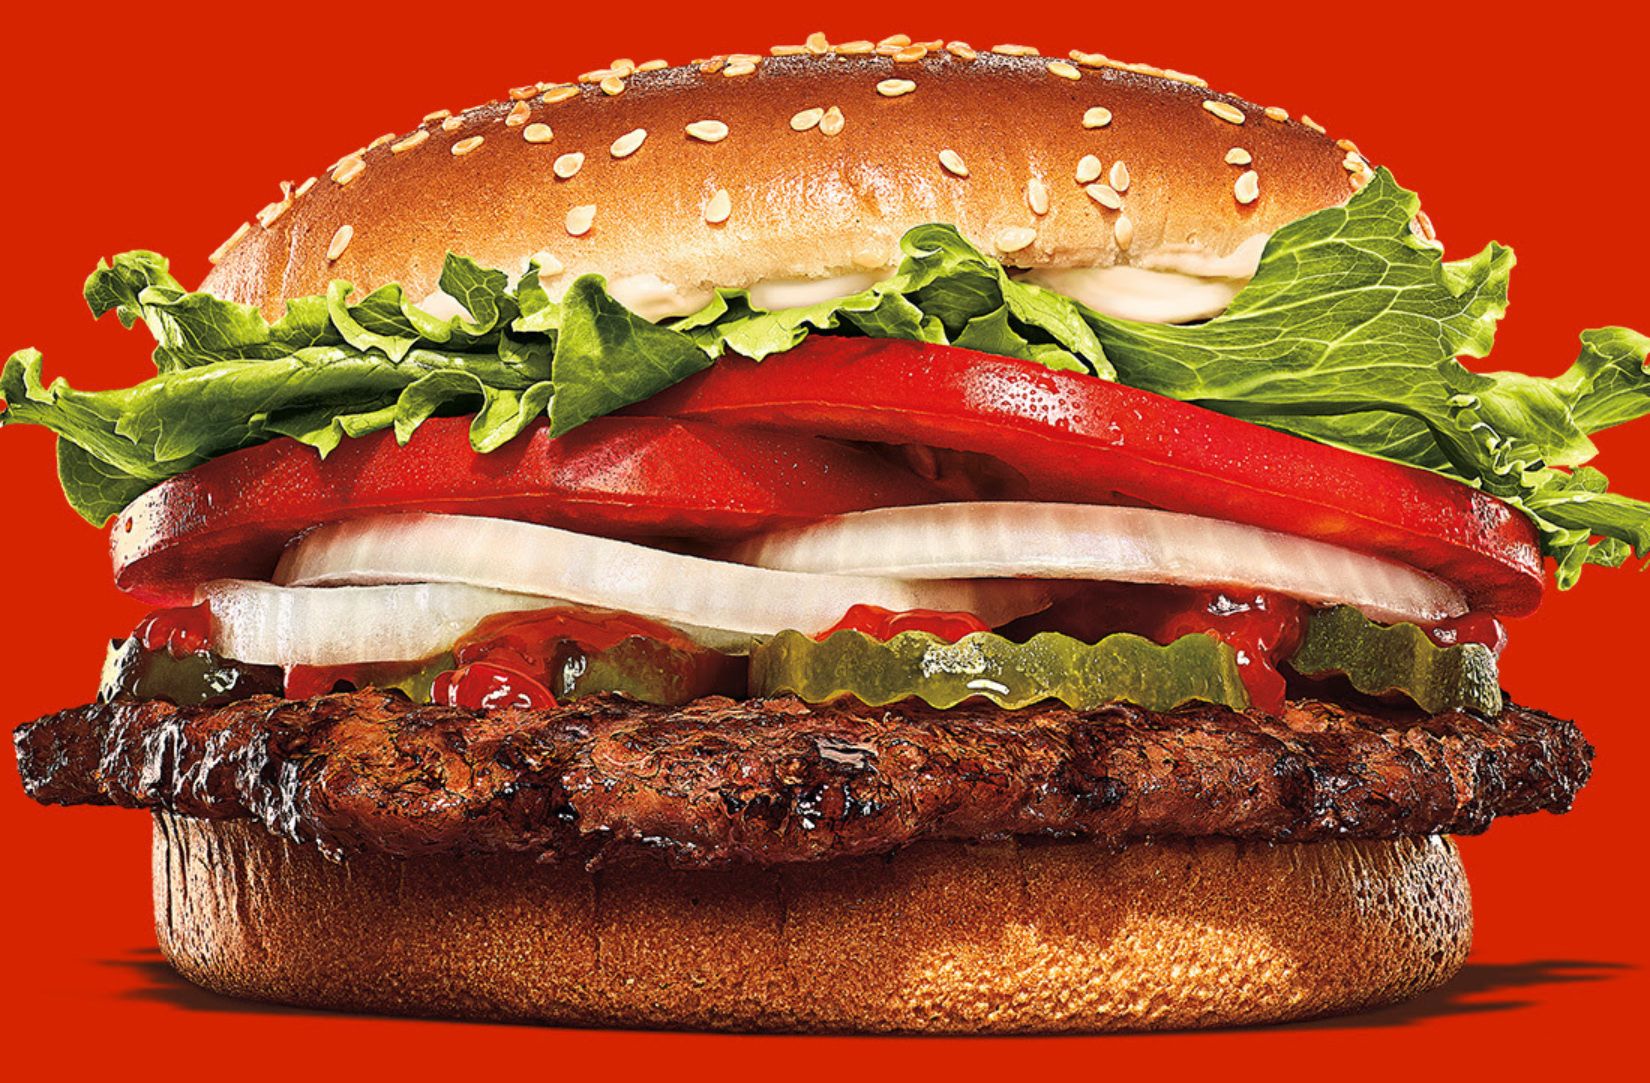 Enjoy a $3 Whopper or Impossible Whopper on Whopper Wednesday at Burger King with an In-app or Online Order